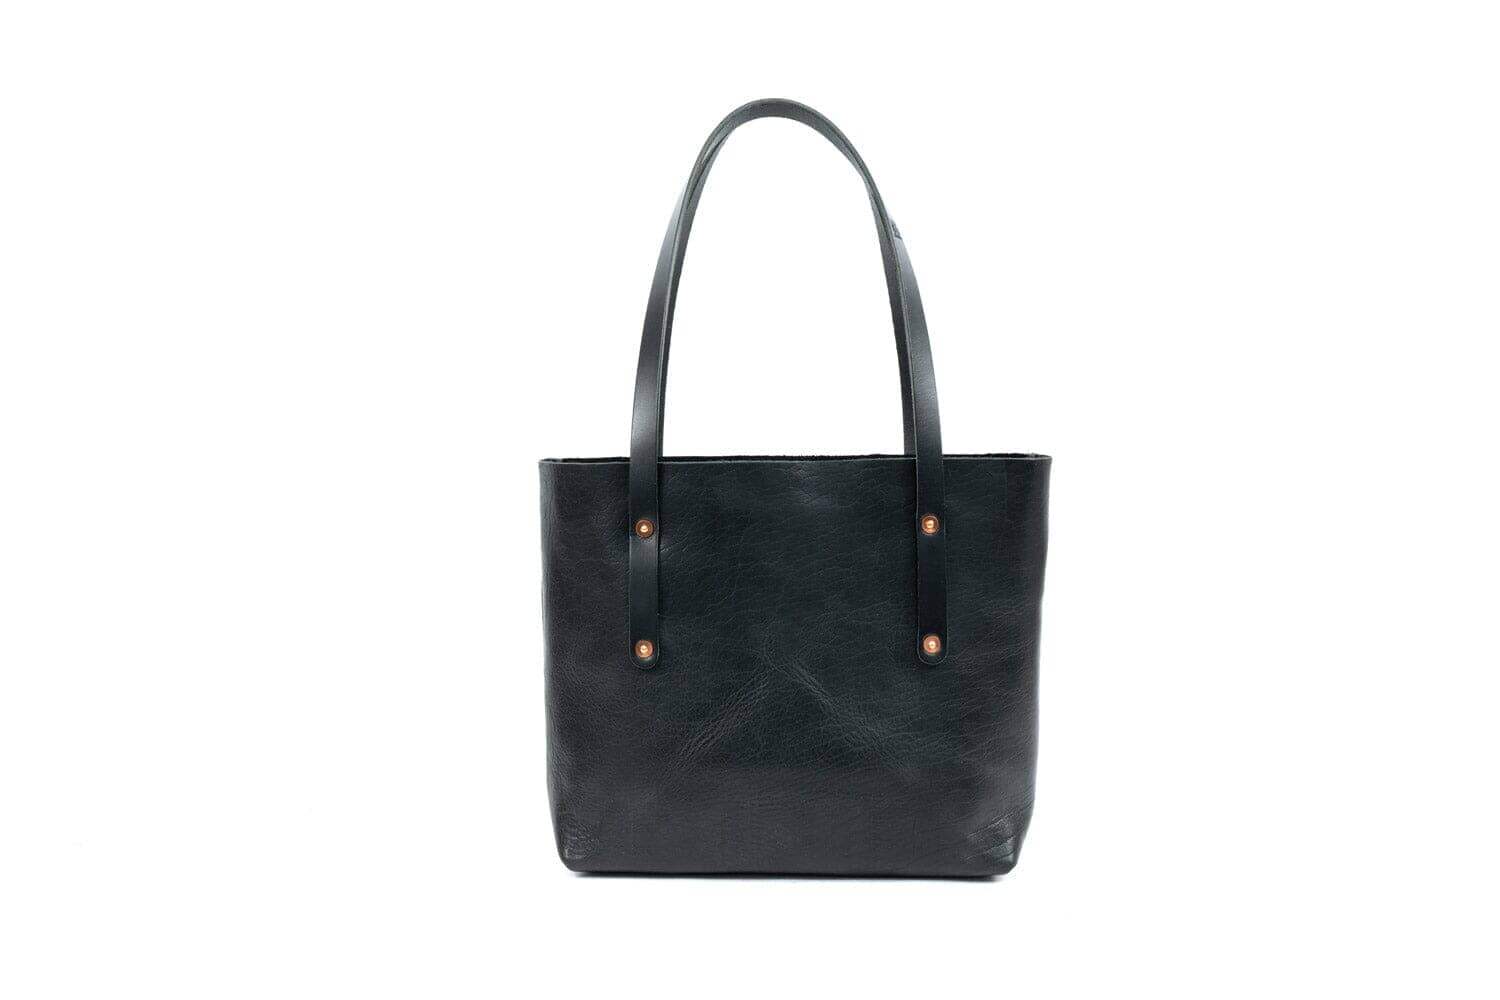 AVERY LEATHER TOTE BAG - SMALL - BLACK BISON (RTS)